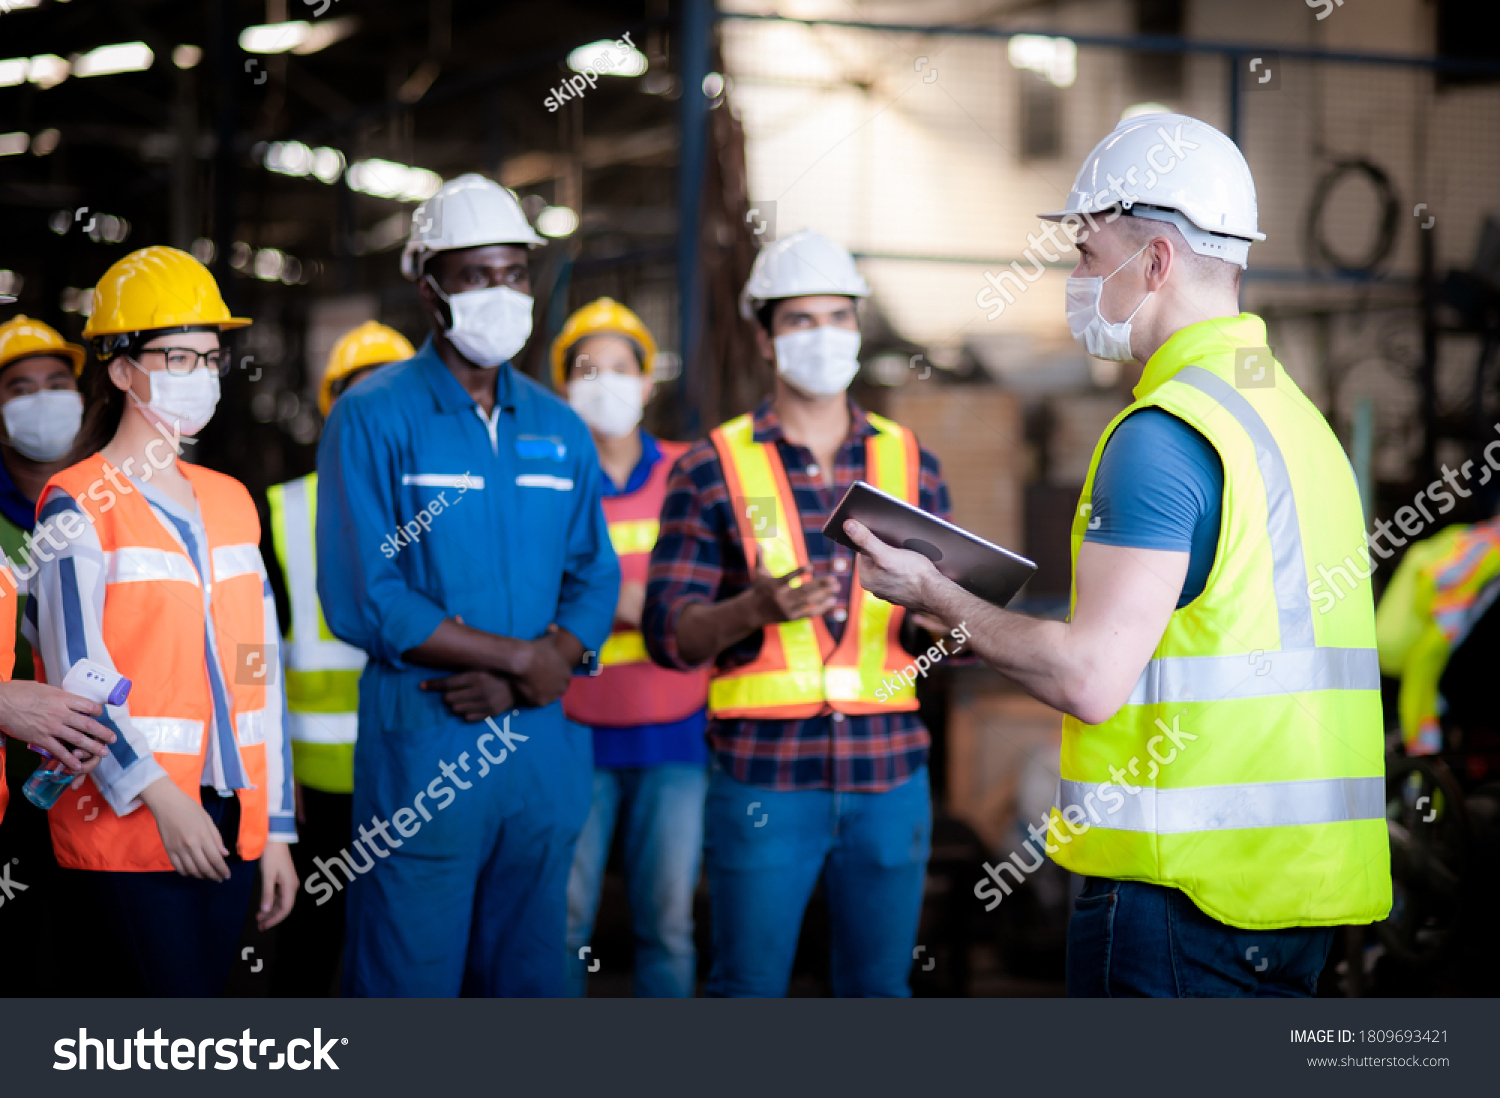 The manager leader team is assignmenting job, training for technicians, supervisor, engineers In the morning meeting before work which everyone wear masks to prevent the coronavirus and safety working #1809693421